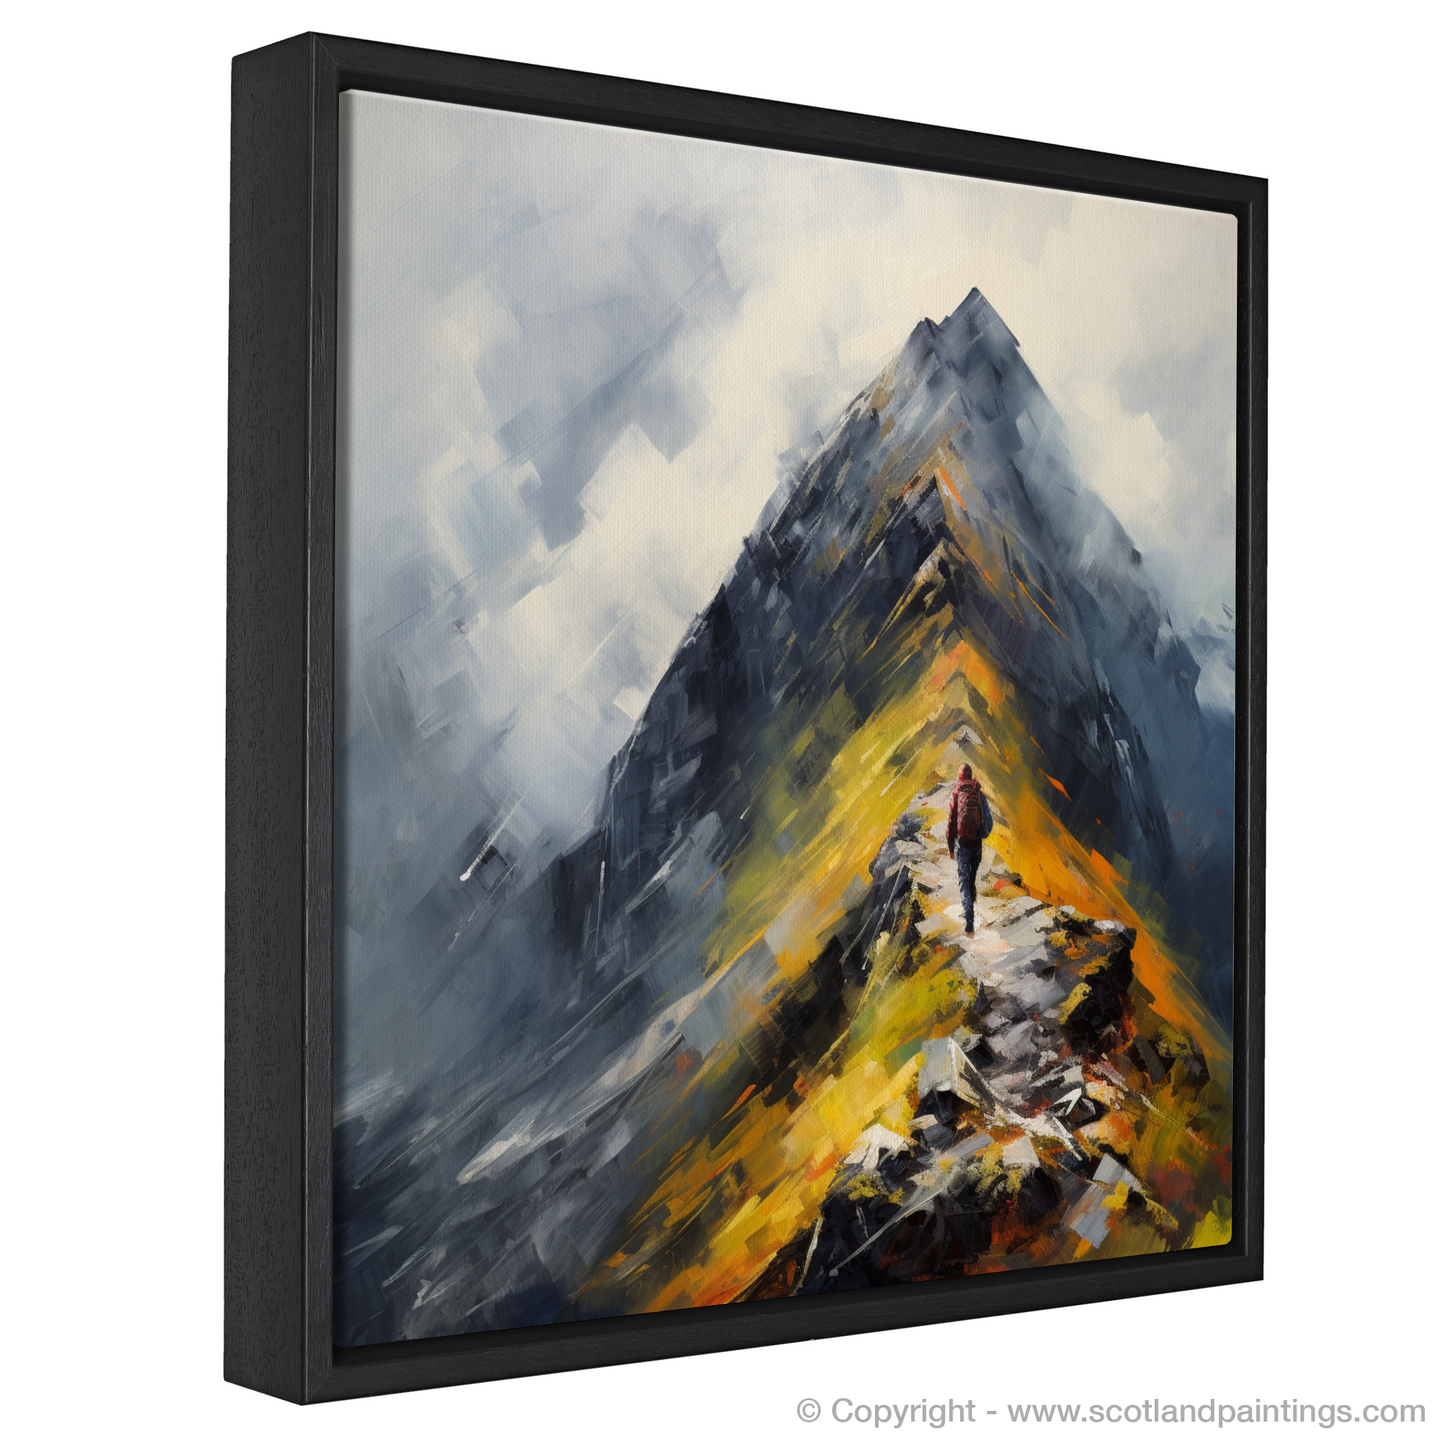 Painting and Art Print of Climber ascending misty peak in Glencoe entitled "Misty Ascent: The Solitary Journey of Glencoe".